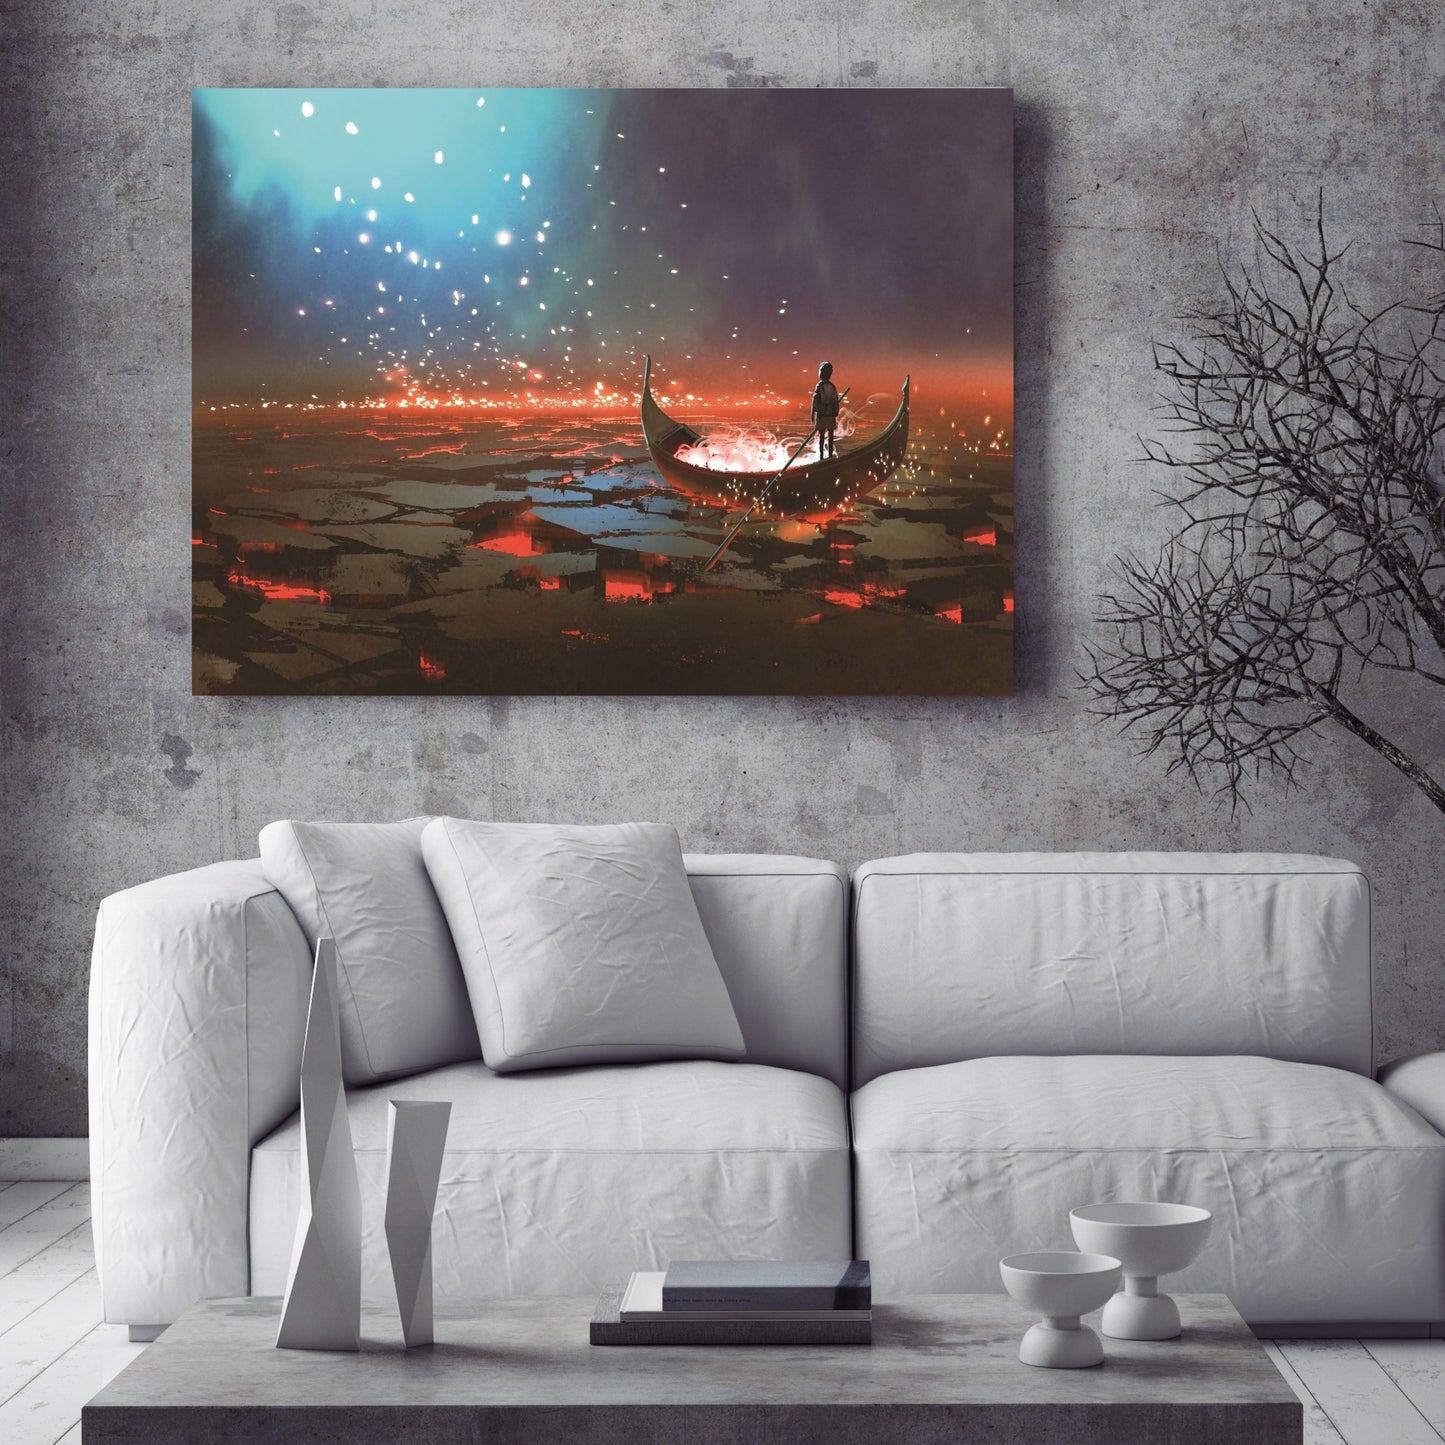 Fantasy world scenery showing a boy rowing a boat in the land of volcanic, digital art style